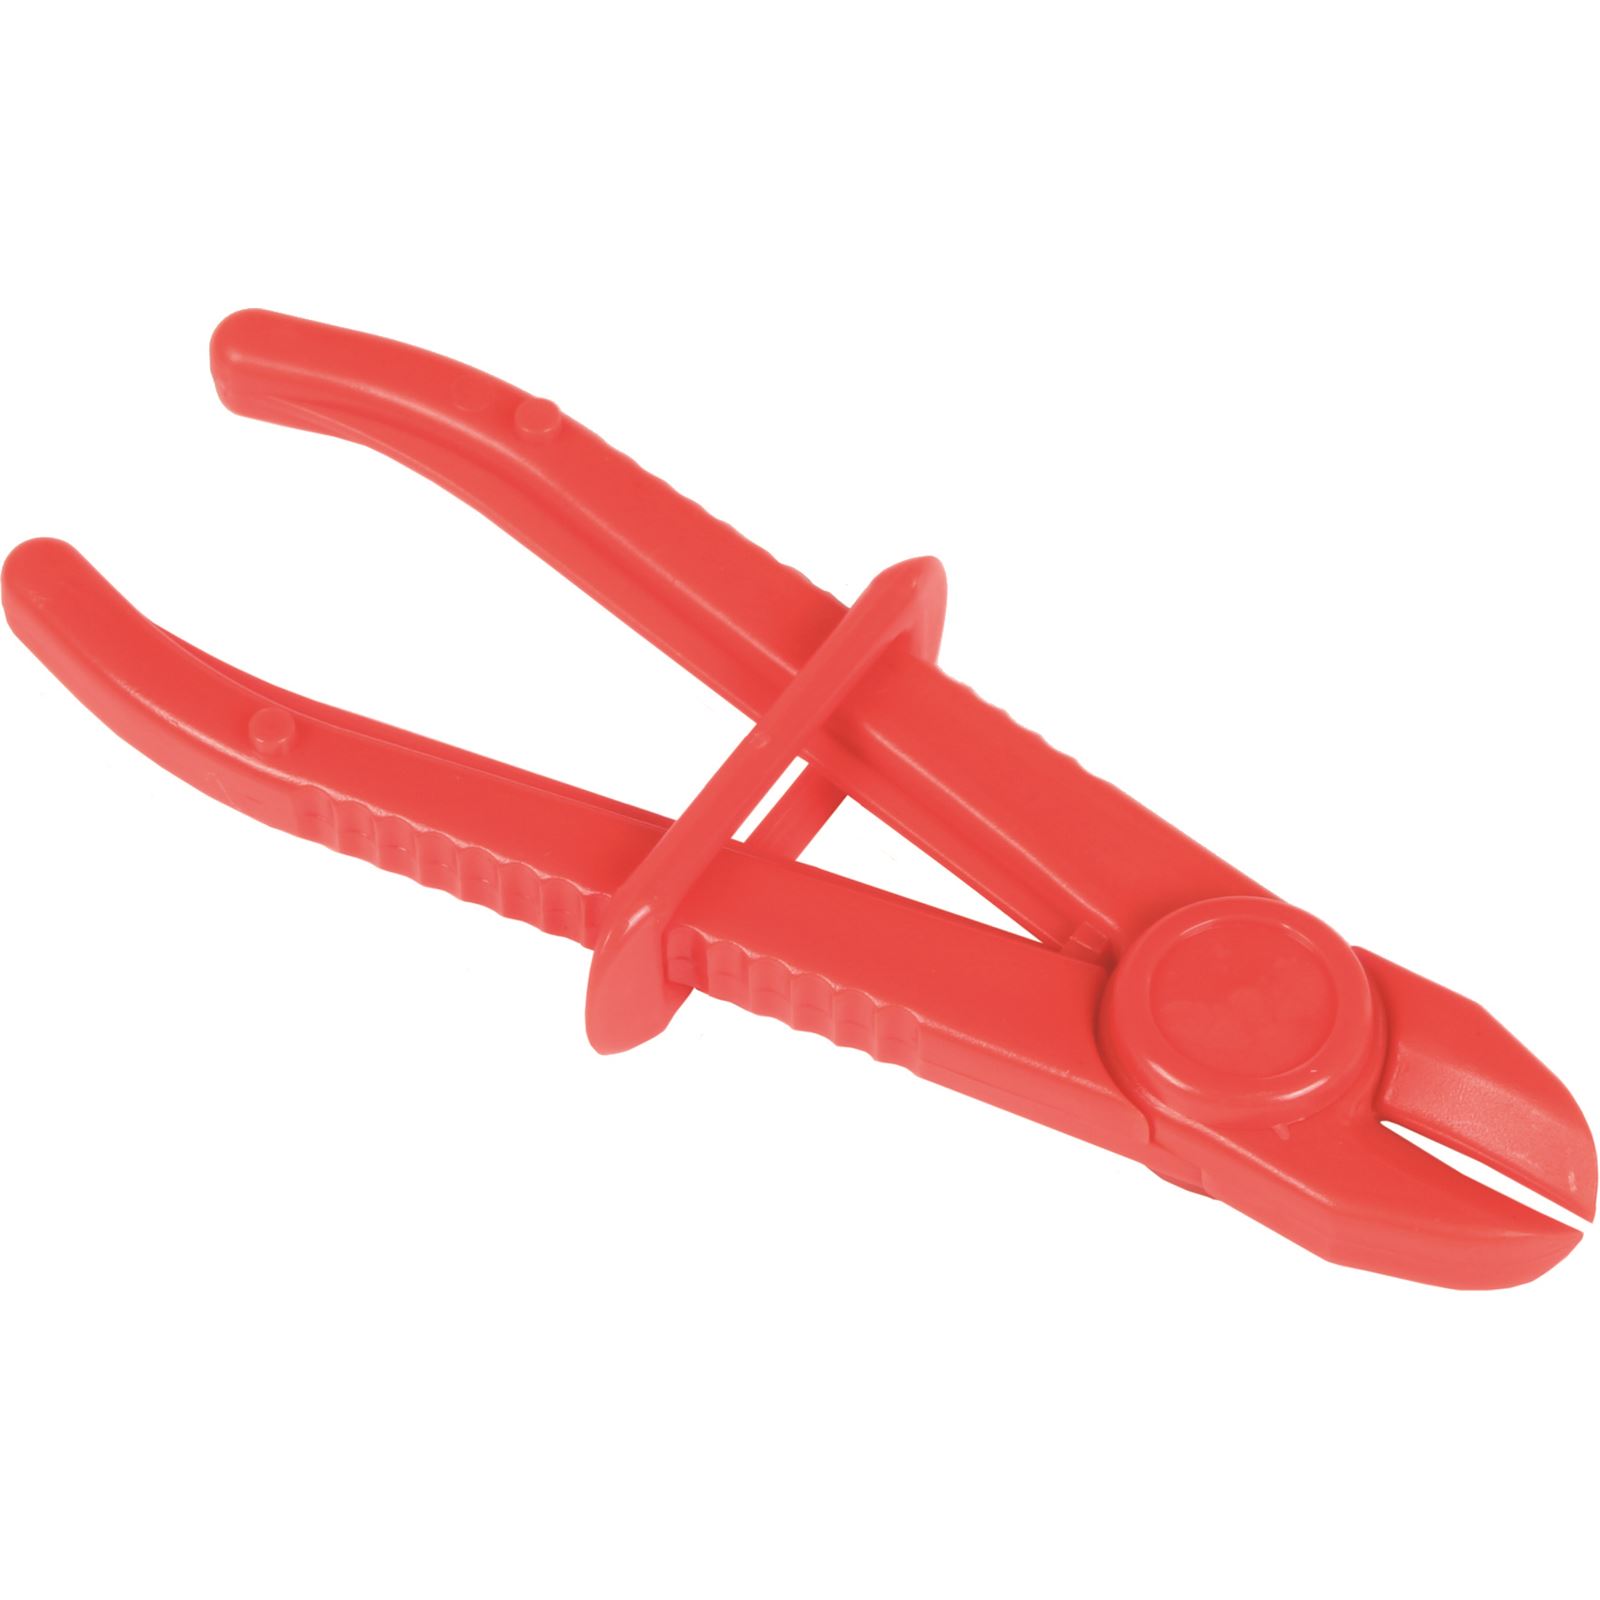 Fire Power Fuel Line Clamping Pliers